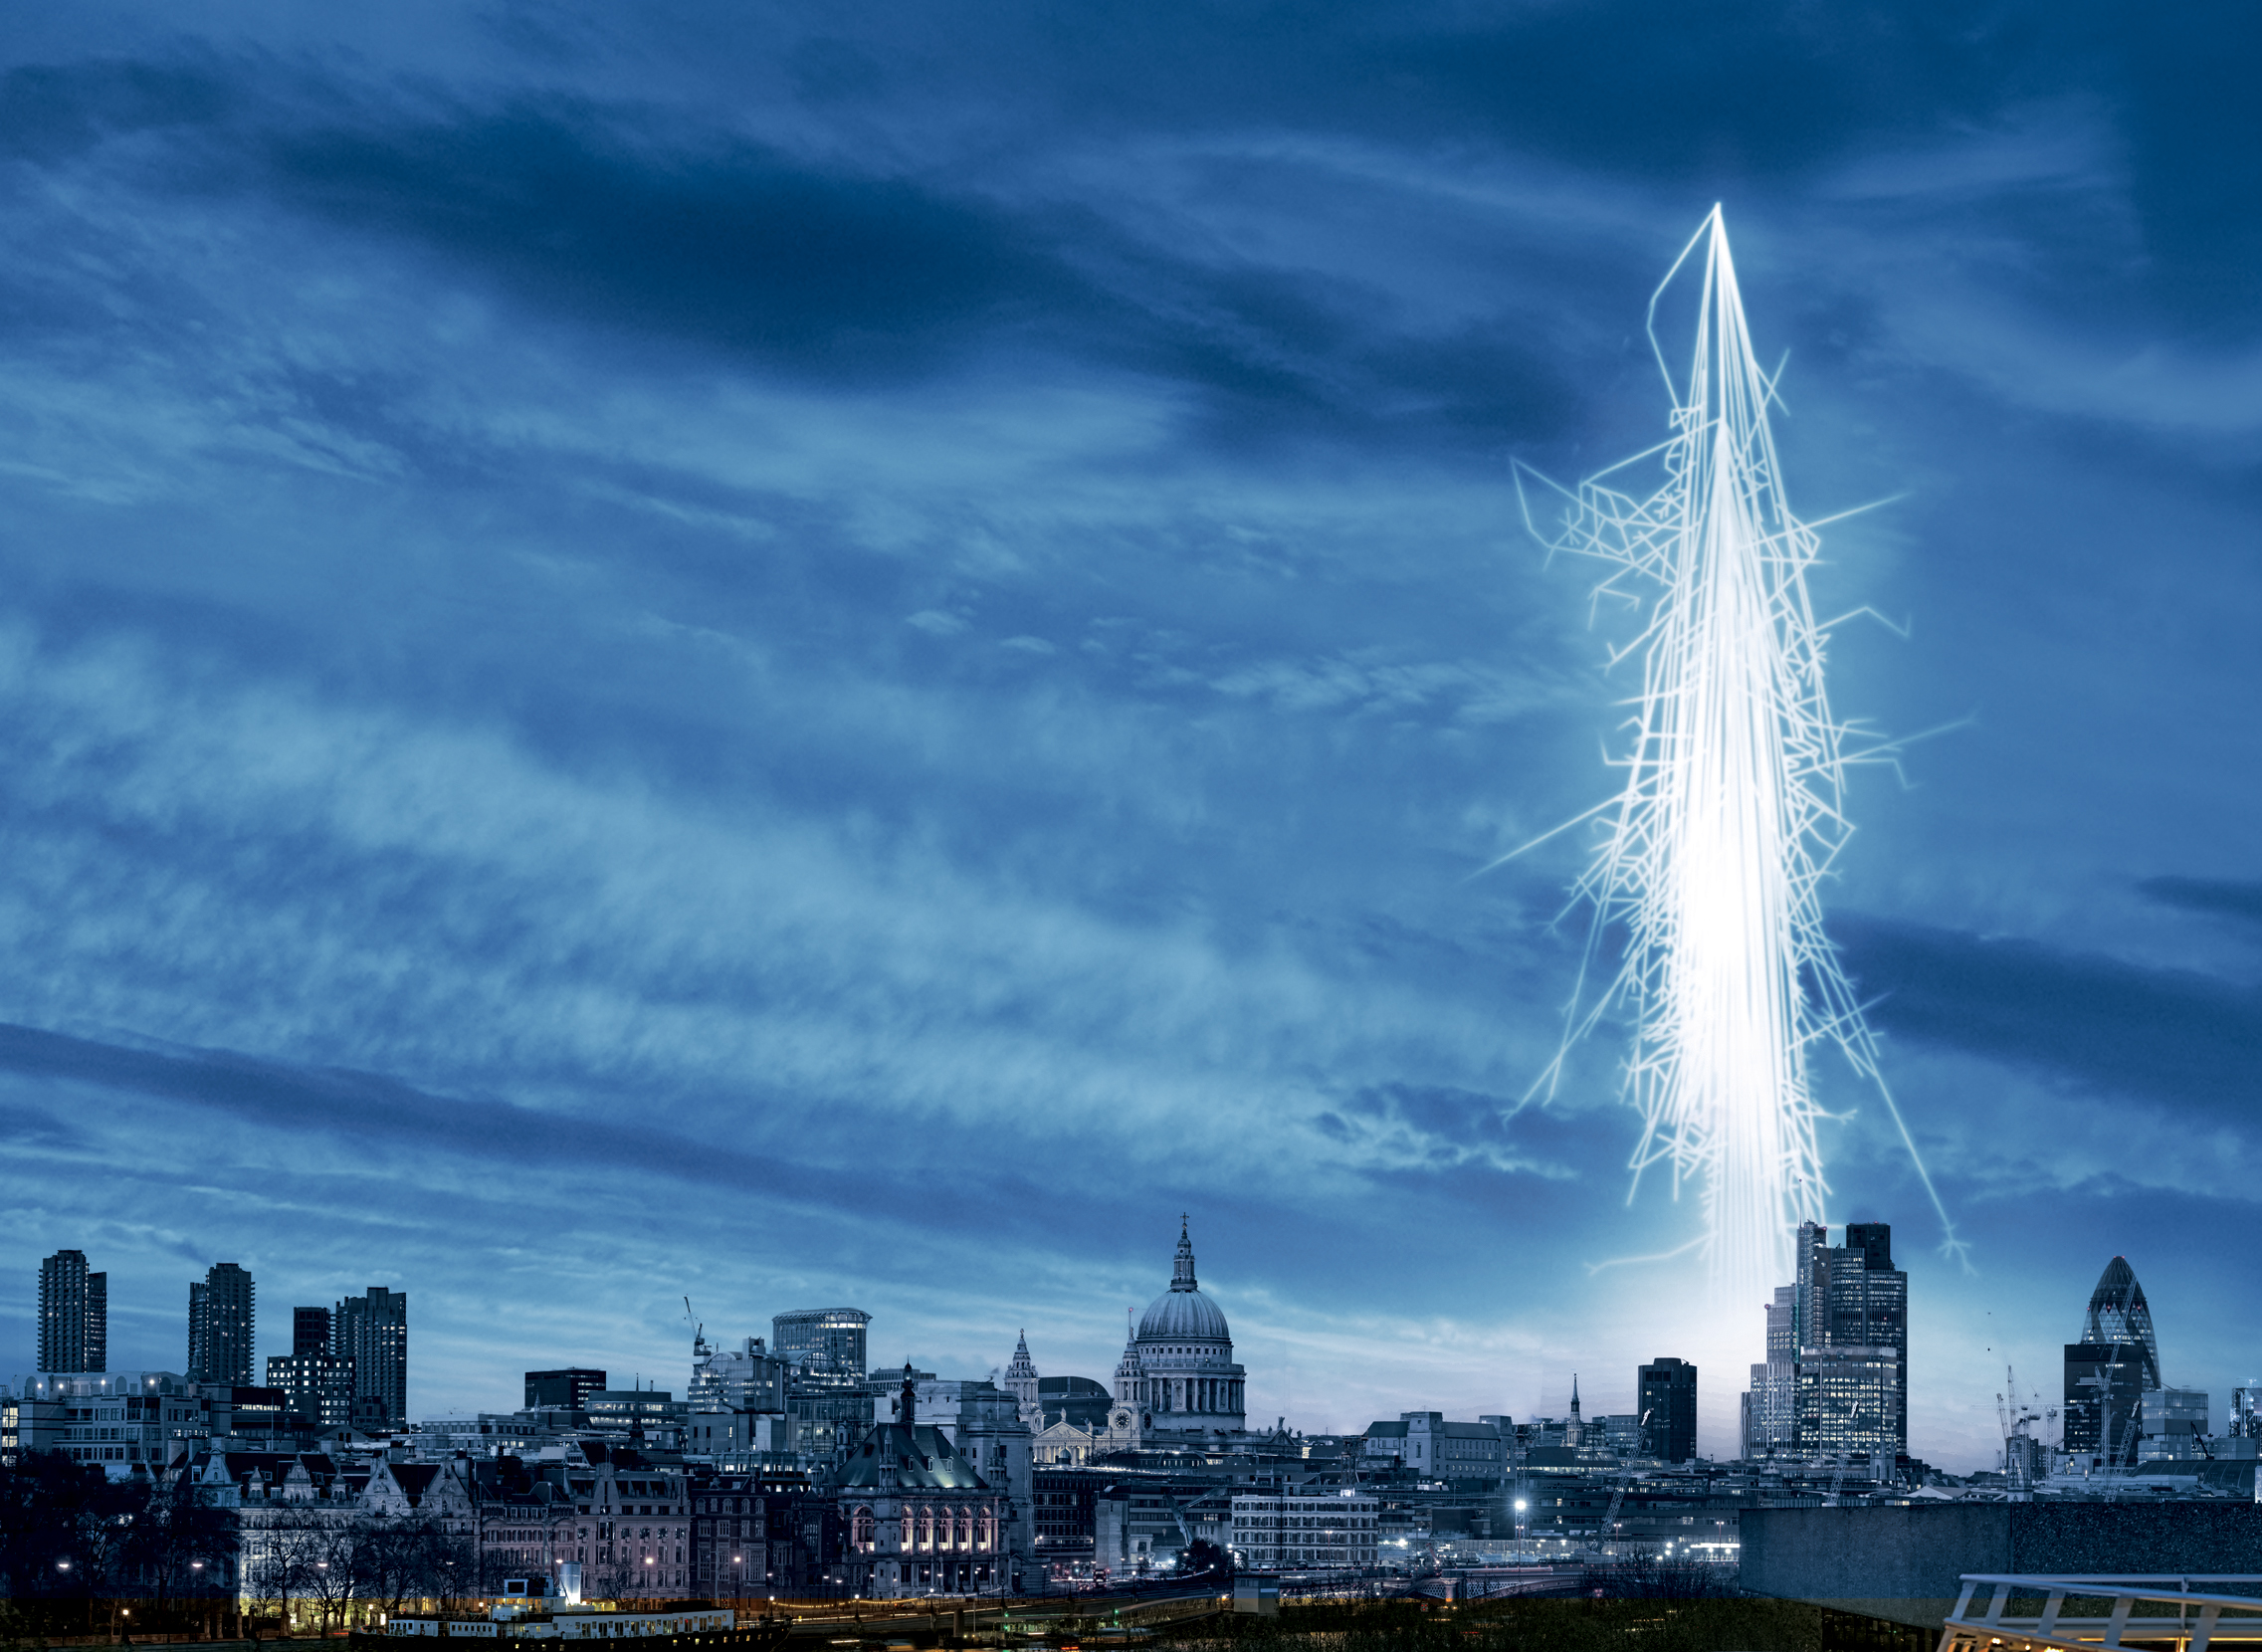 Artist's impression of cosmic-ray shower over London